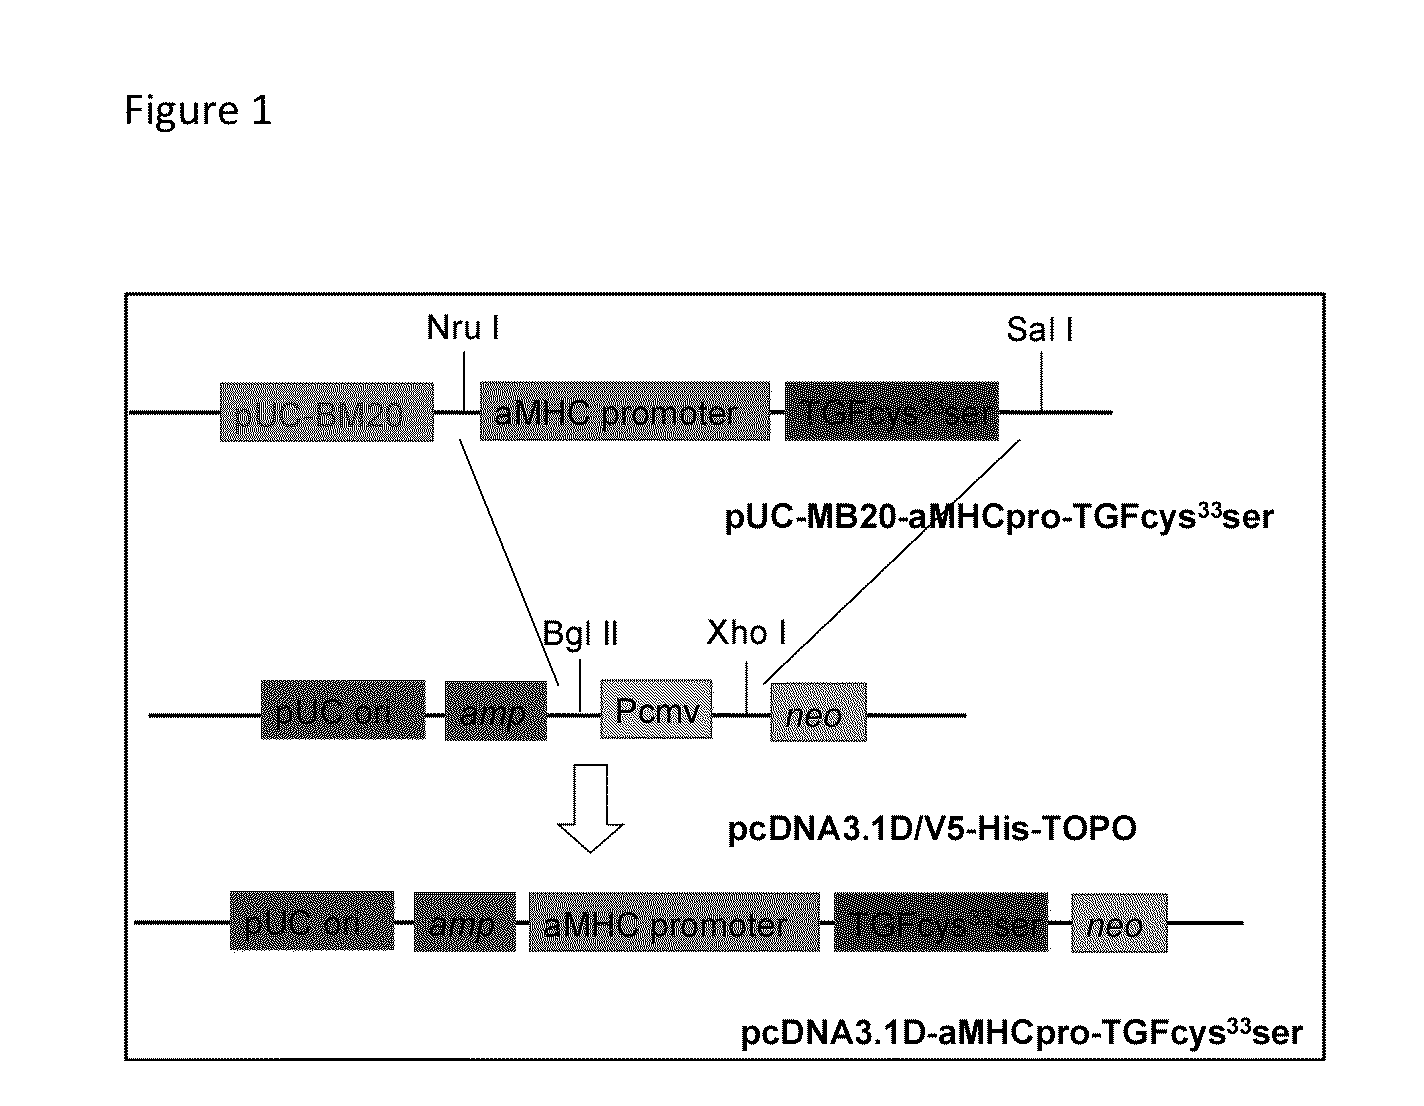 Model and method for a transgenic bovidae expressing cardiac fibrosis and associated pathology